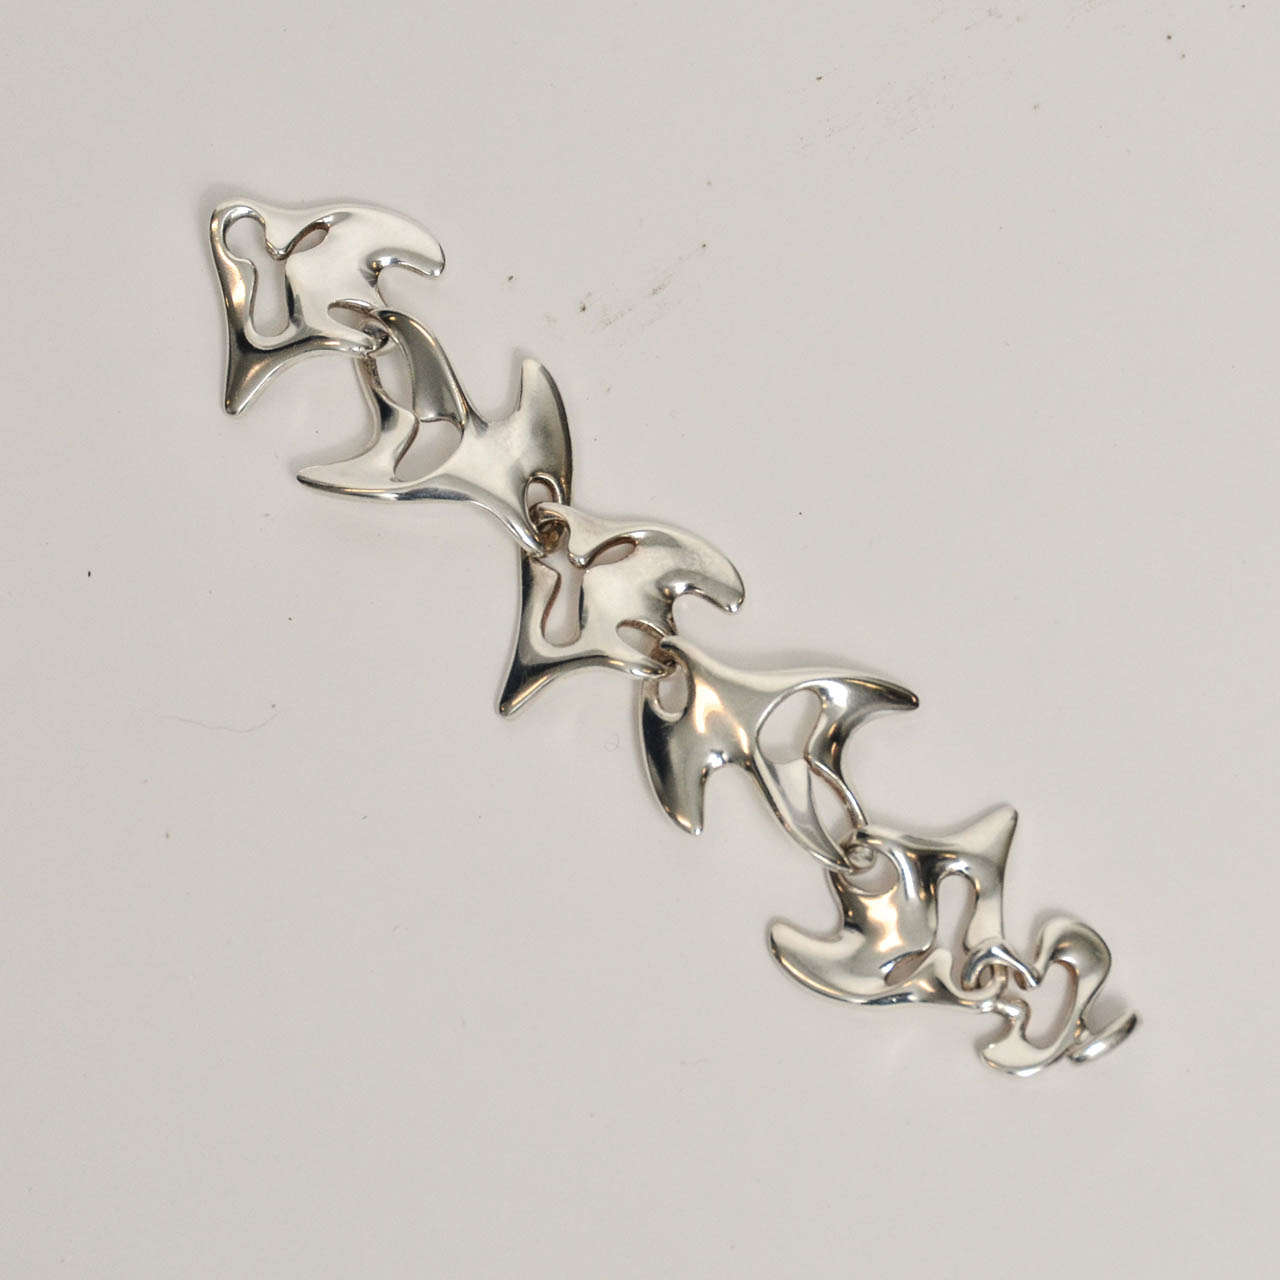 The Amoeba:  Fantastic Sculptural Links Designed by Henning Koppel for Georg Jensen in the late 1940's.  This (Design 89) is the more virile of his 2 biomorphic bracelet designs of the period.  It is evident that Koppel studied Sculpture.